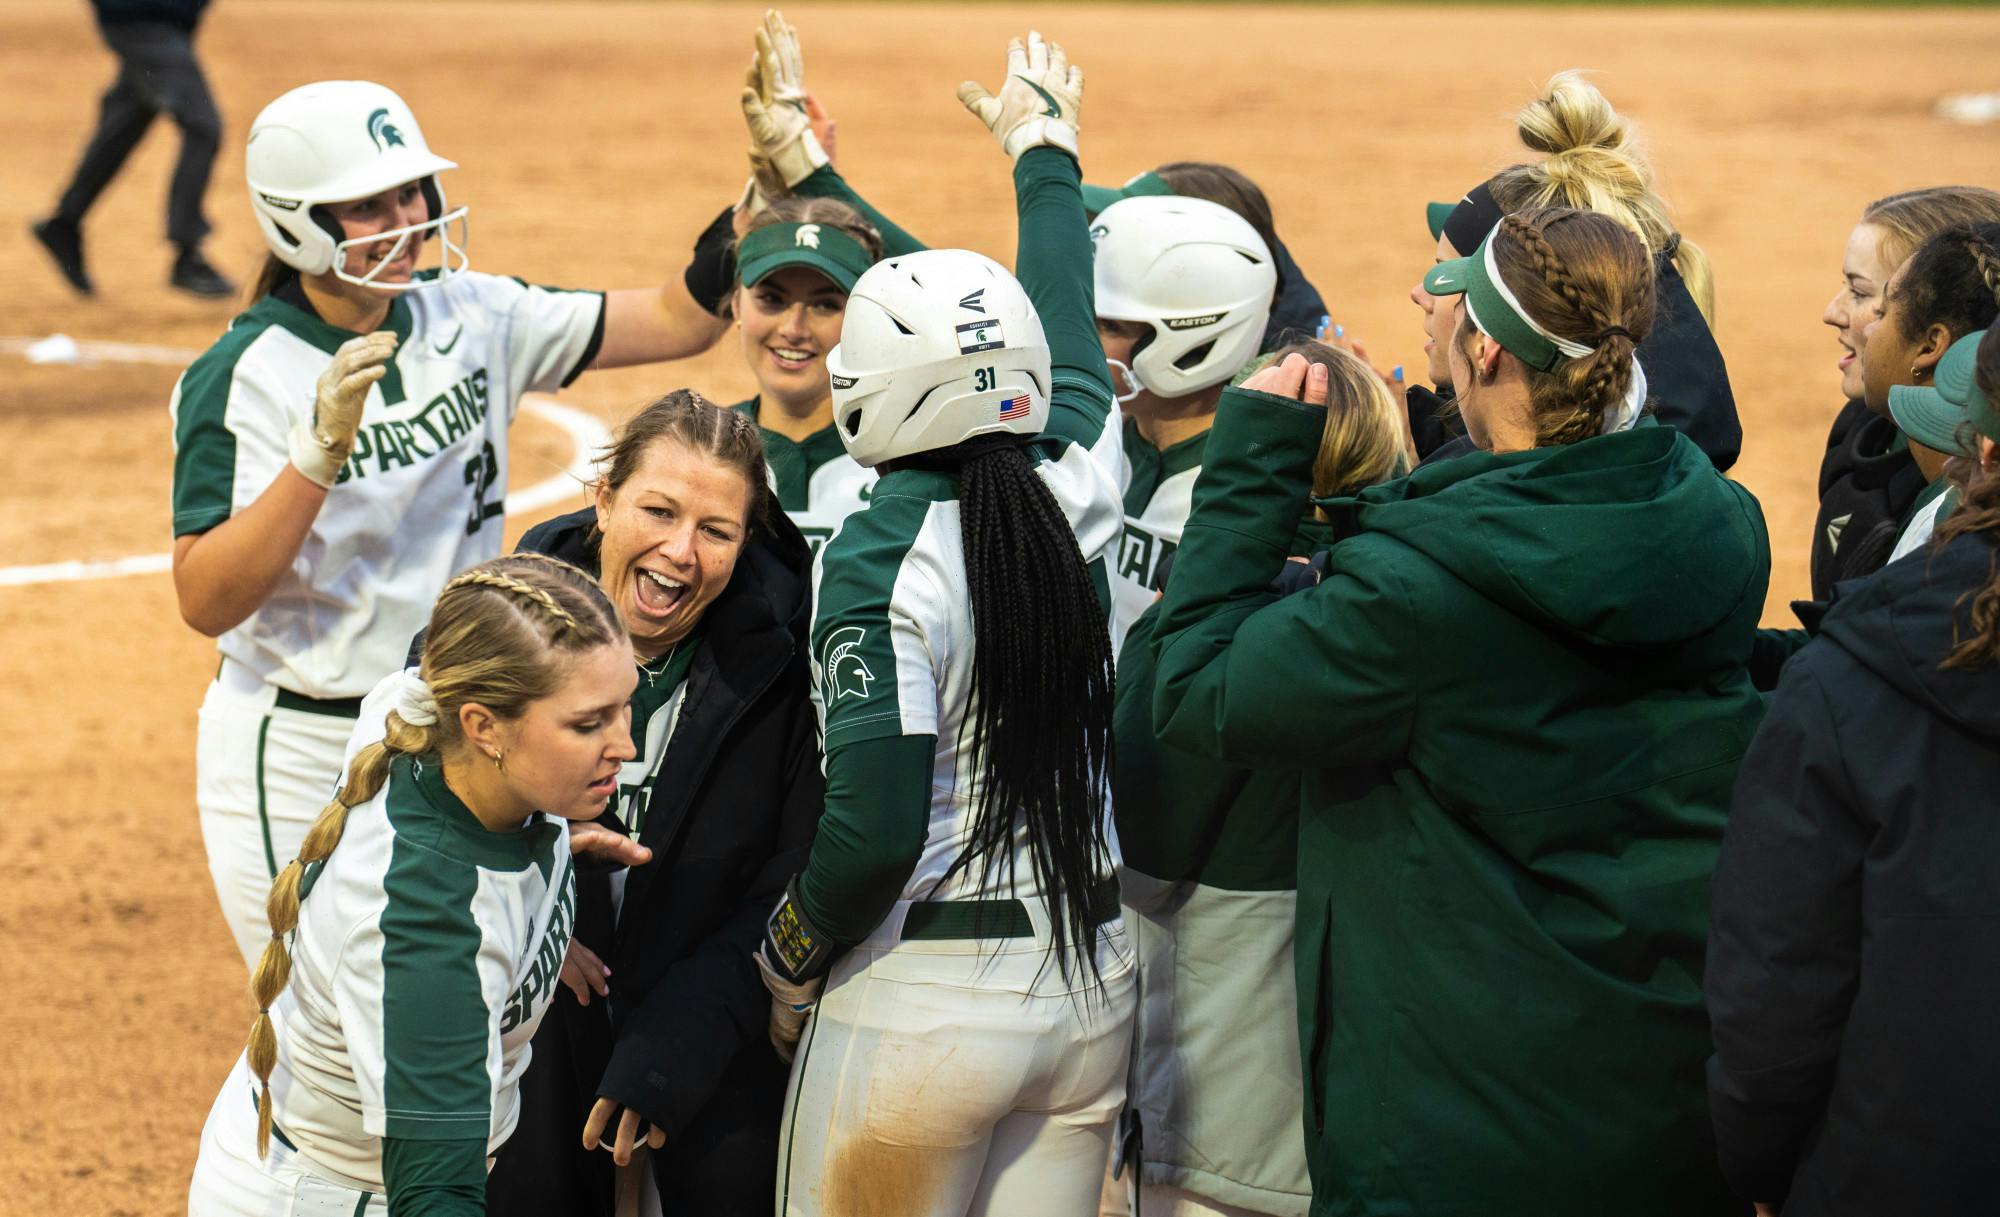 <p>Michigan State celebrates their win after the game ended due to the mercy rule. The Spartans shut out the Chippewas, 8-0, in a six-inning game on March 22, 2022. </p>